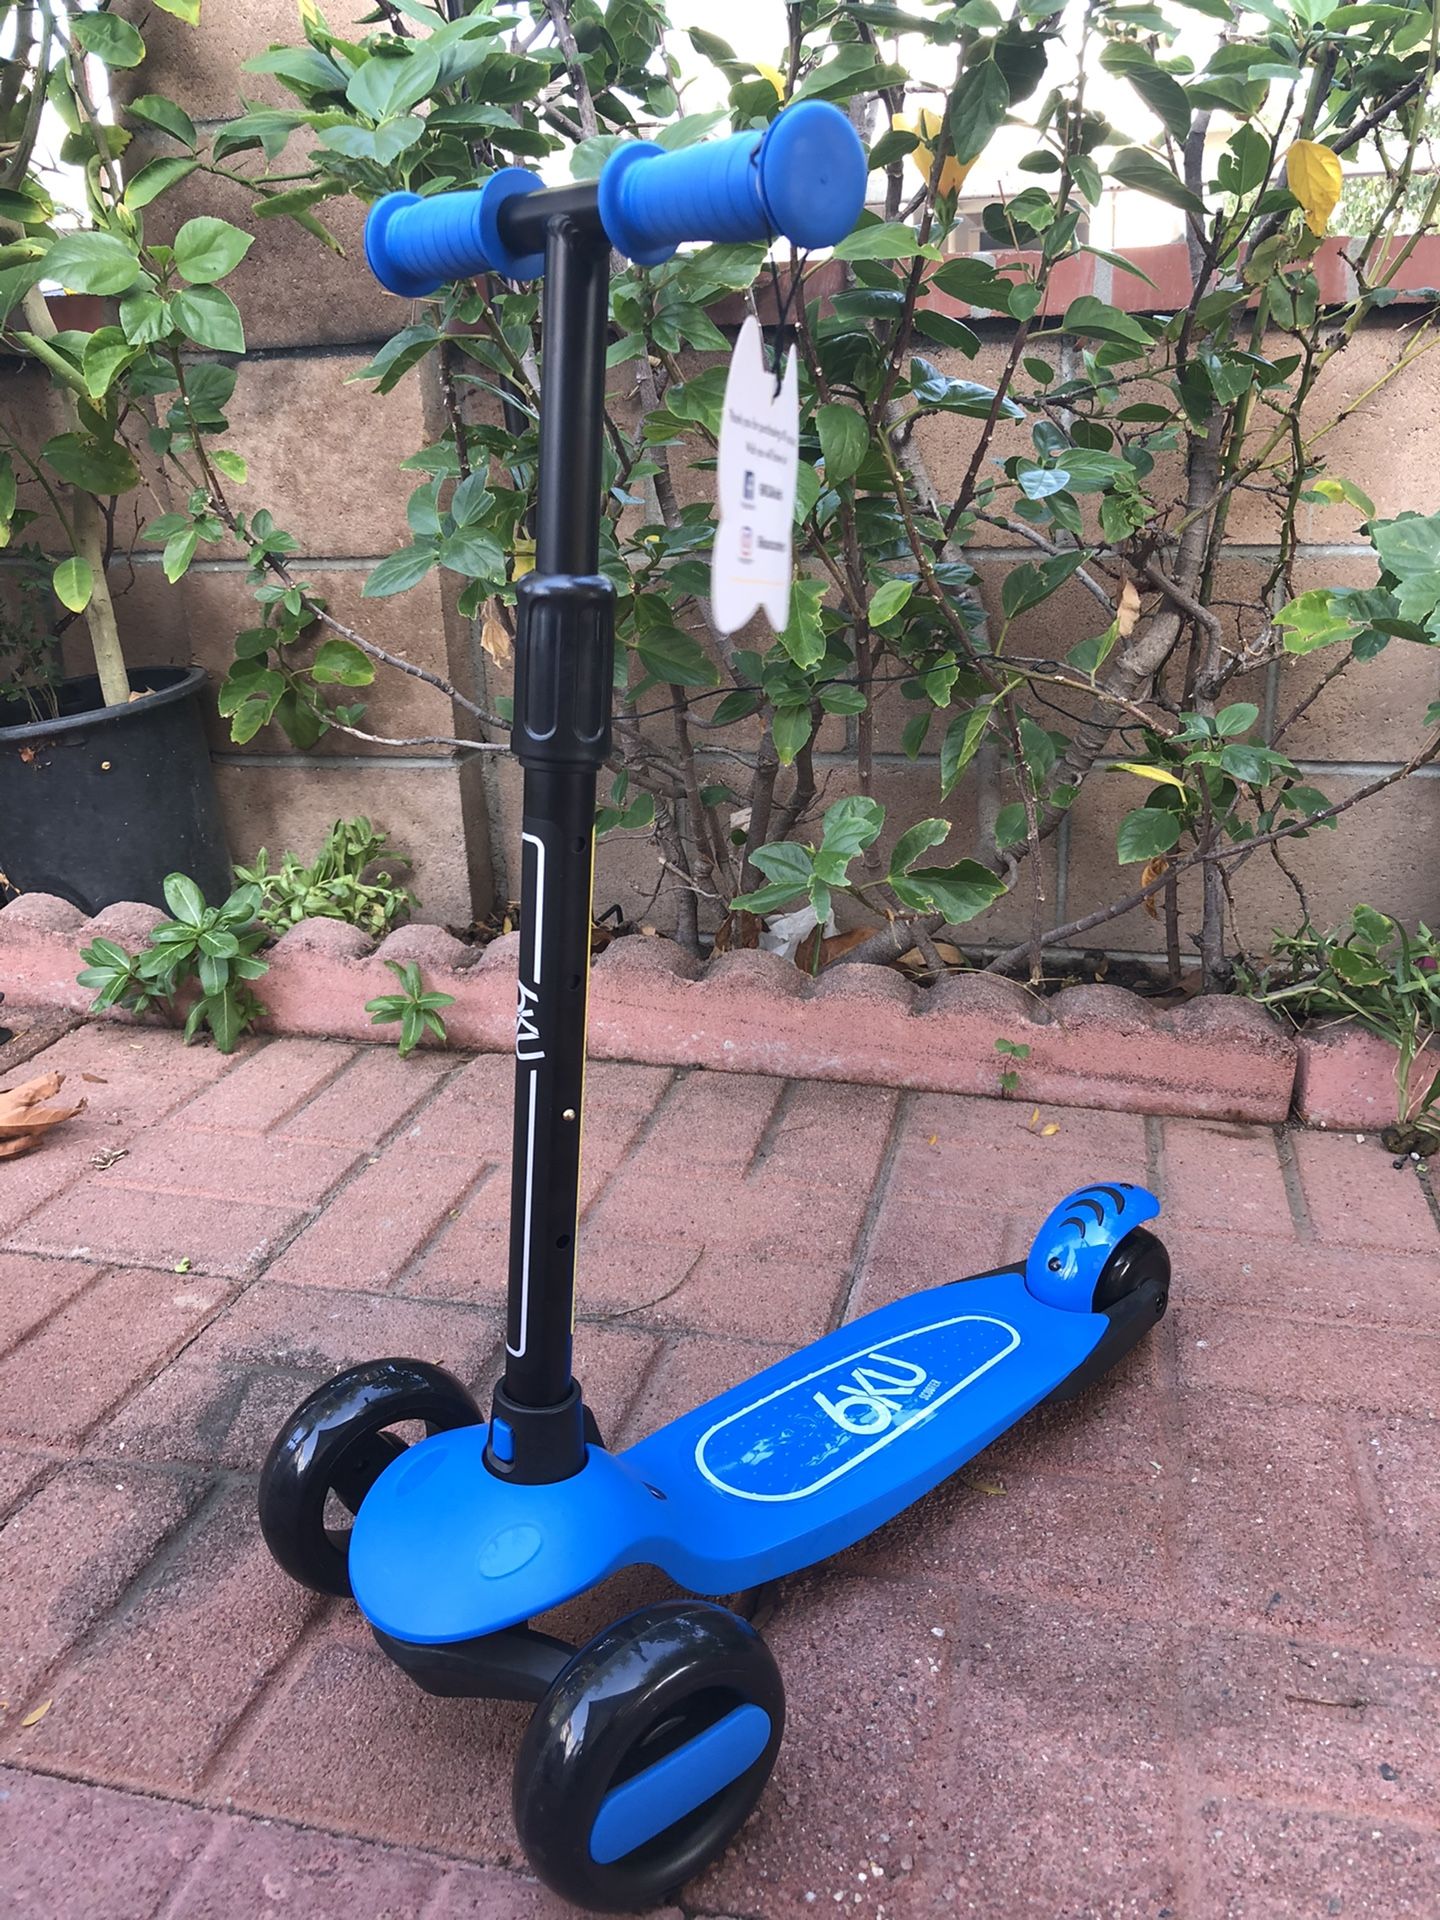 6KU 3 Wheels Kick Scooter for Kids Adjustable Height, Learn to Steer with Extra-Wide PU LED Flashing Wheels for Children